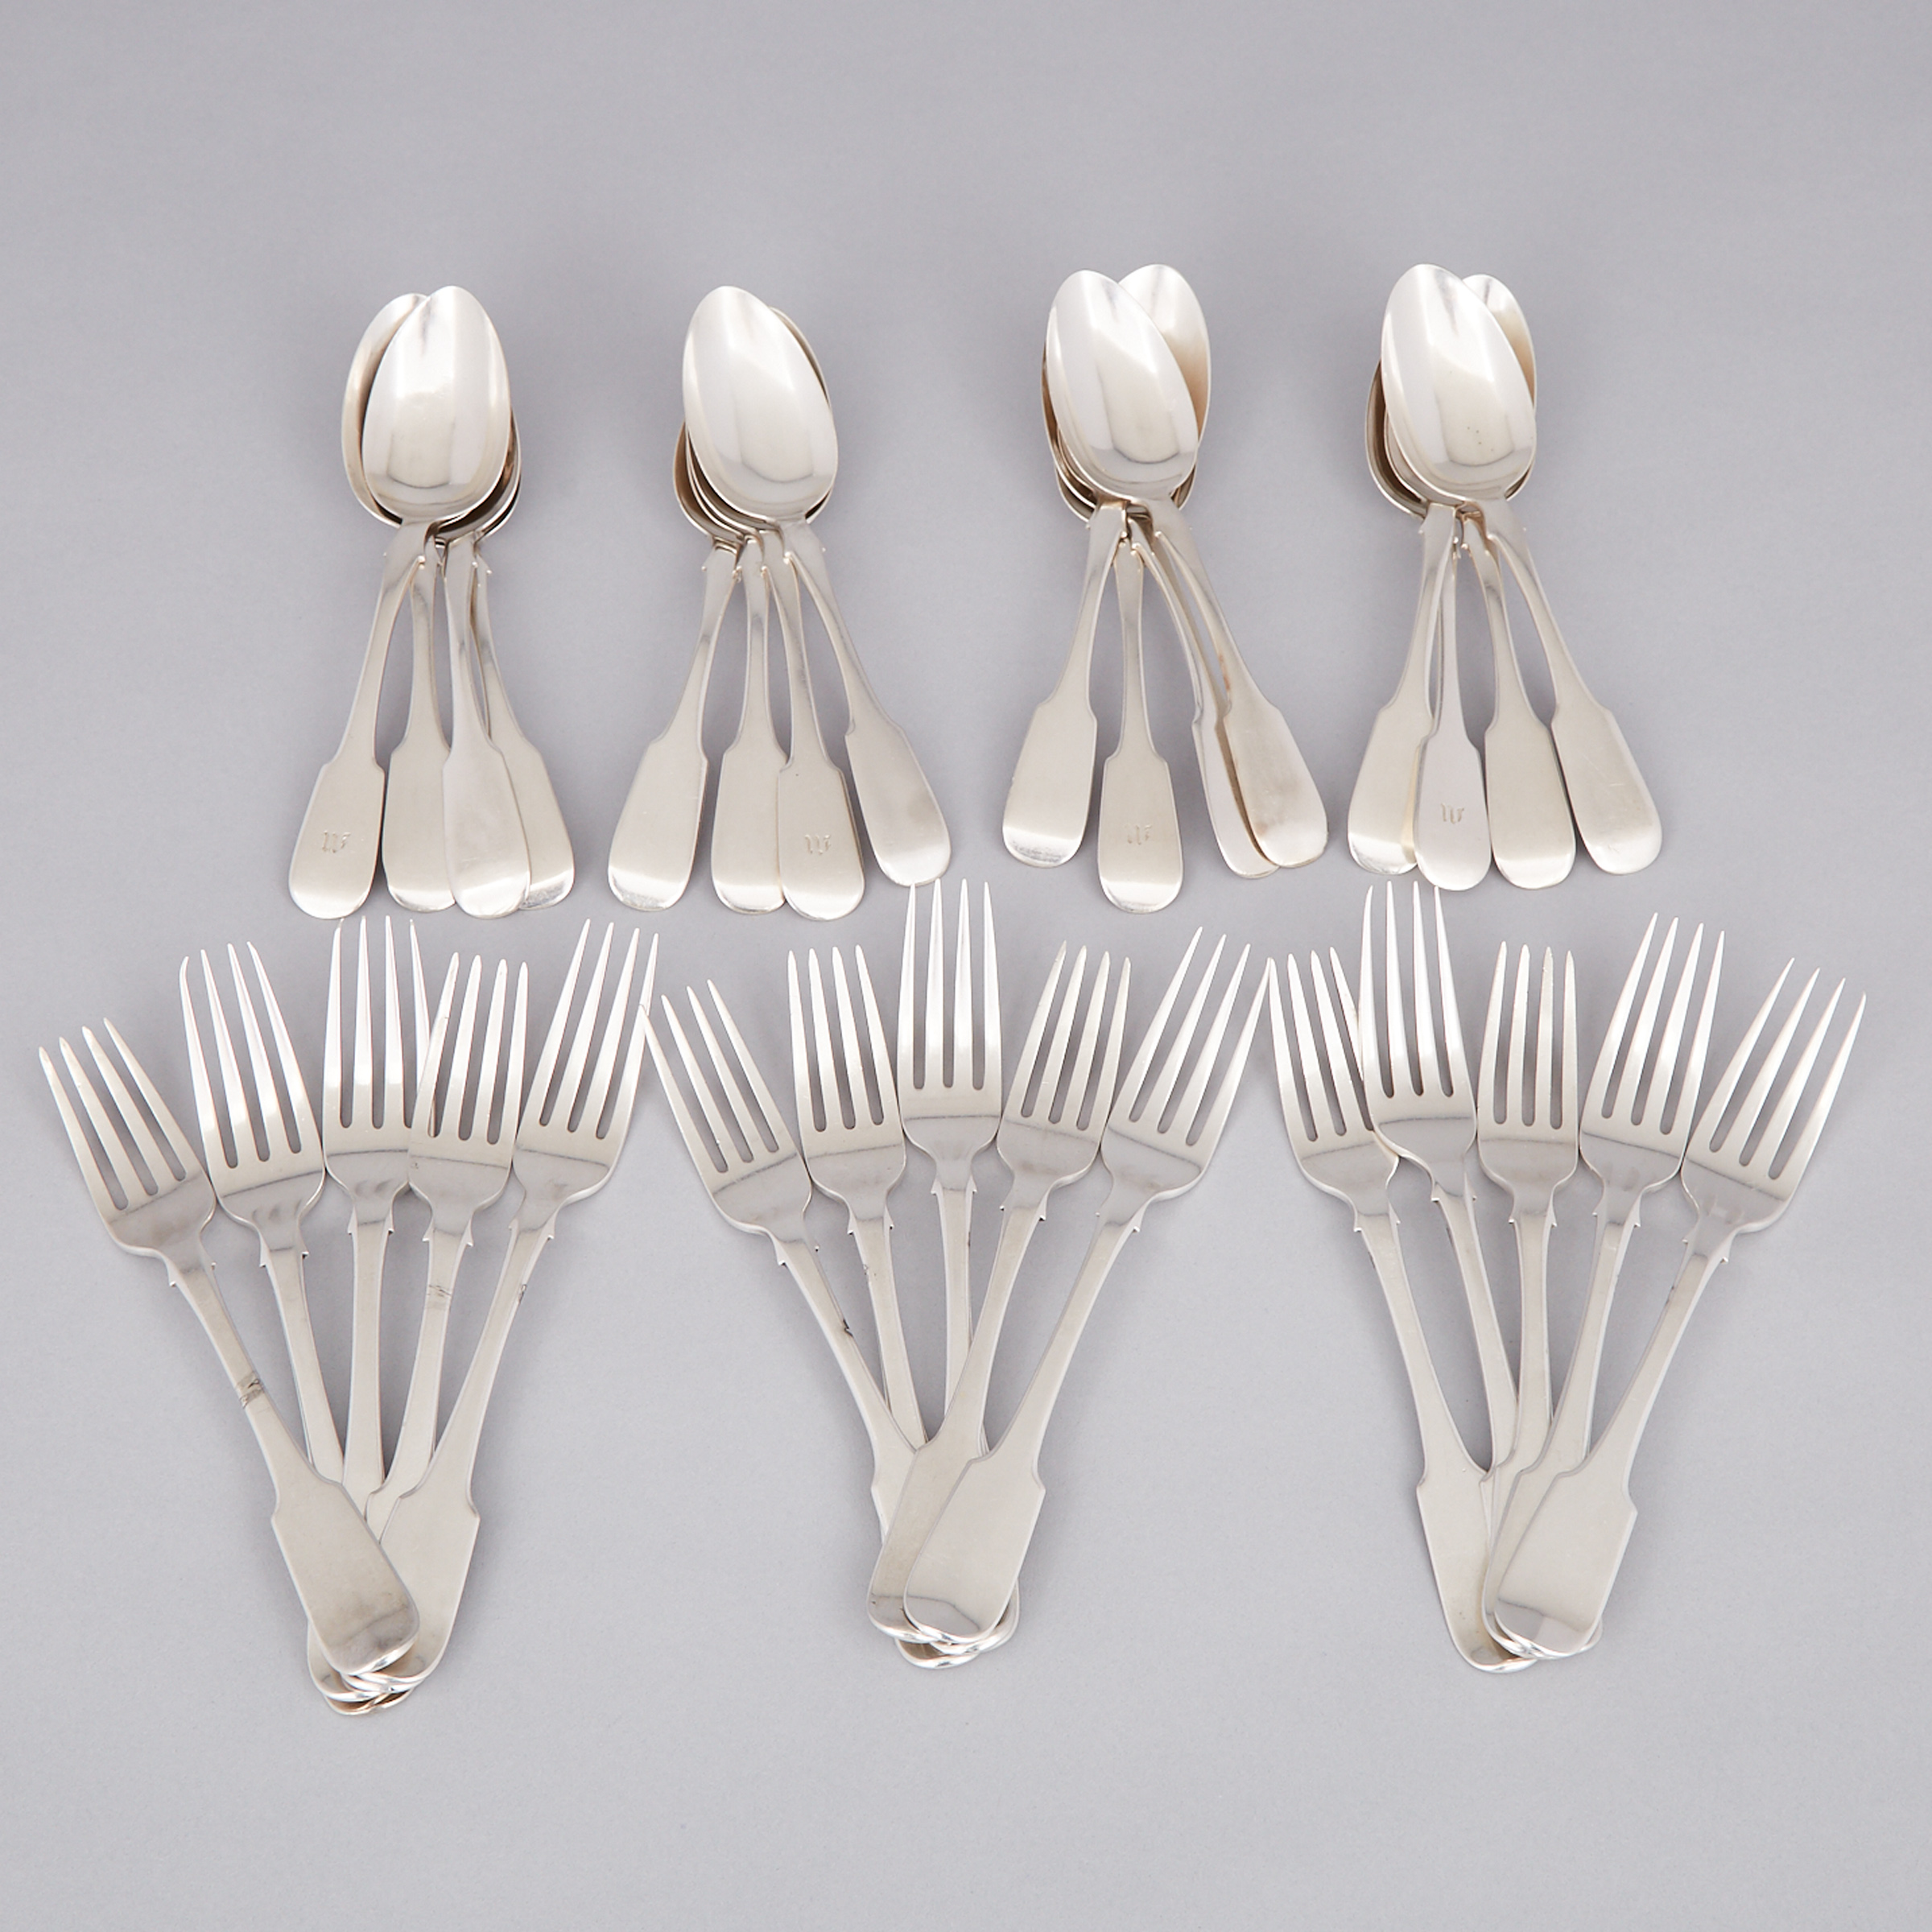 Sixteen Canadian Silver Fiddle Pattern Dessert Spoons and Fifteen Dessert Forks, George Savage/George Savage & Son, Montreal, Que., mid-19th century